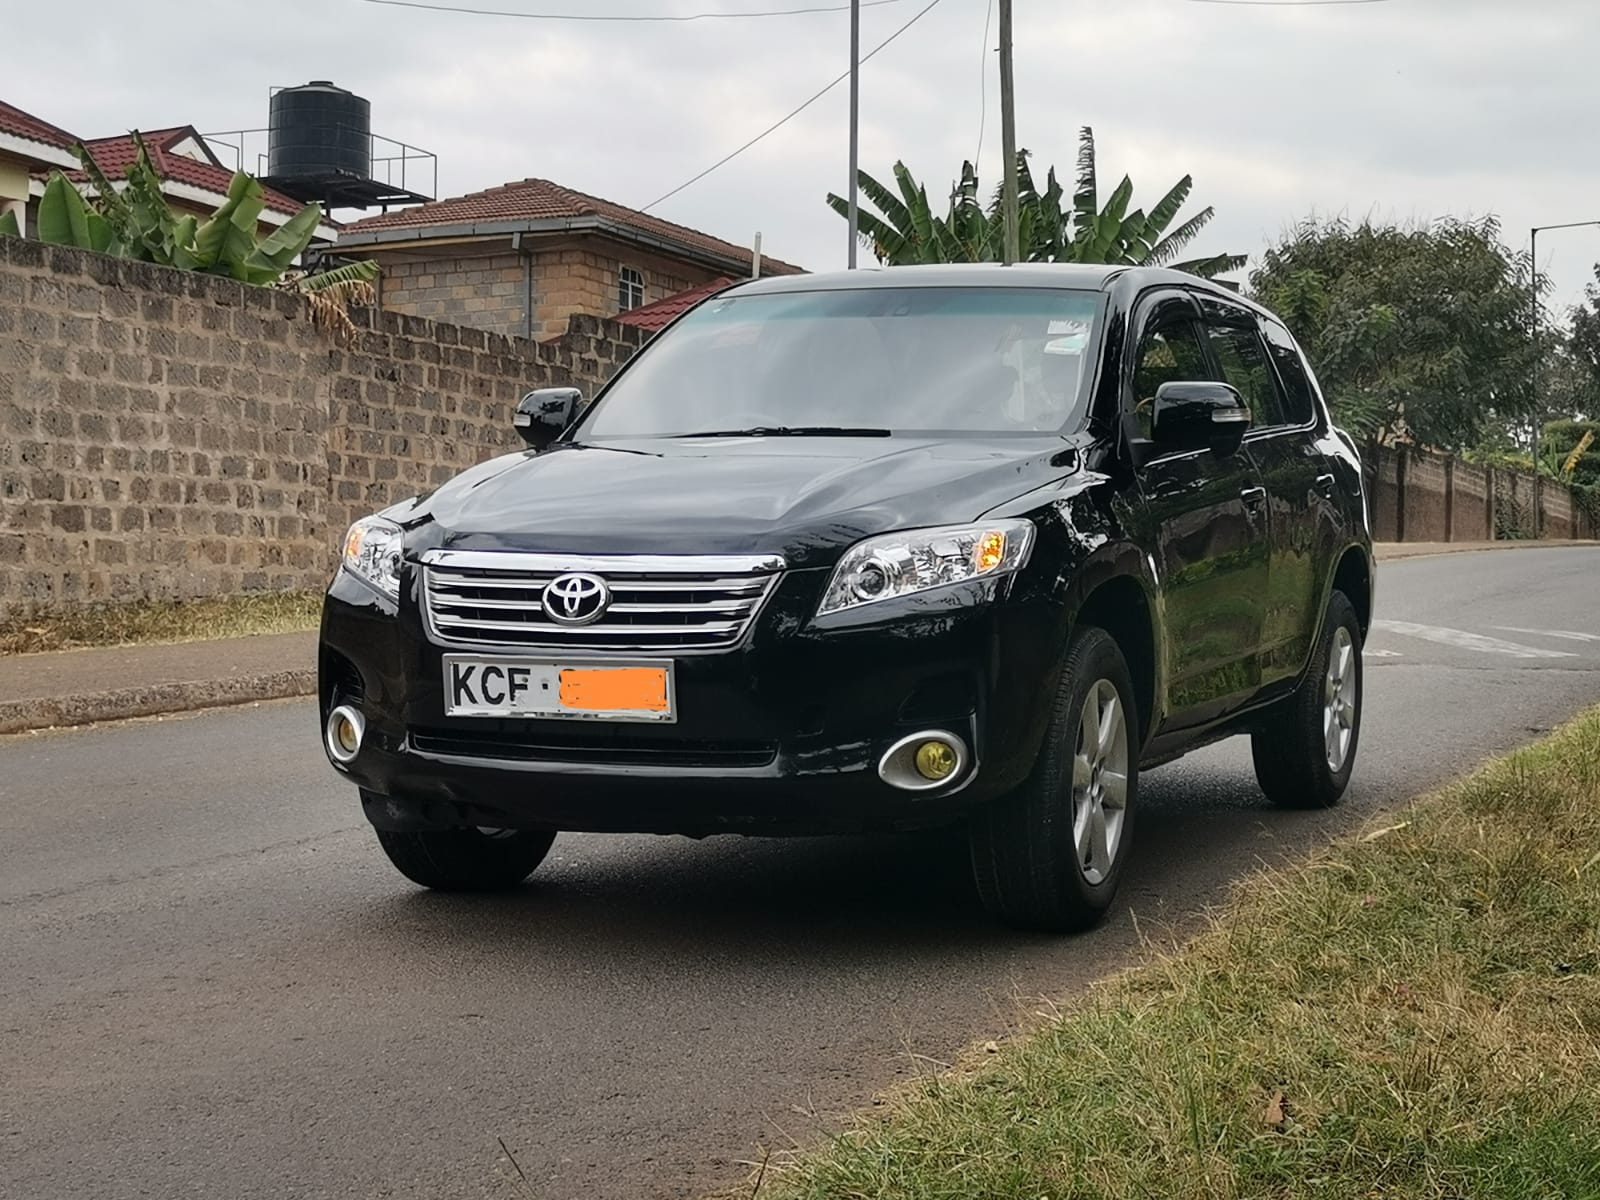 Toyota Vanguard With sunroof Pay 20%, 80% in 60 MONTHLY INSTALLMENTS 1.35M ONO offer New